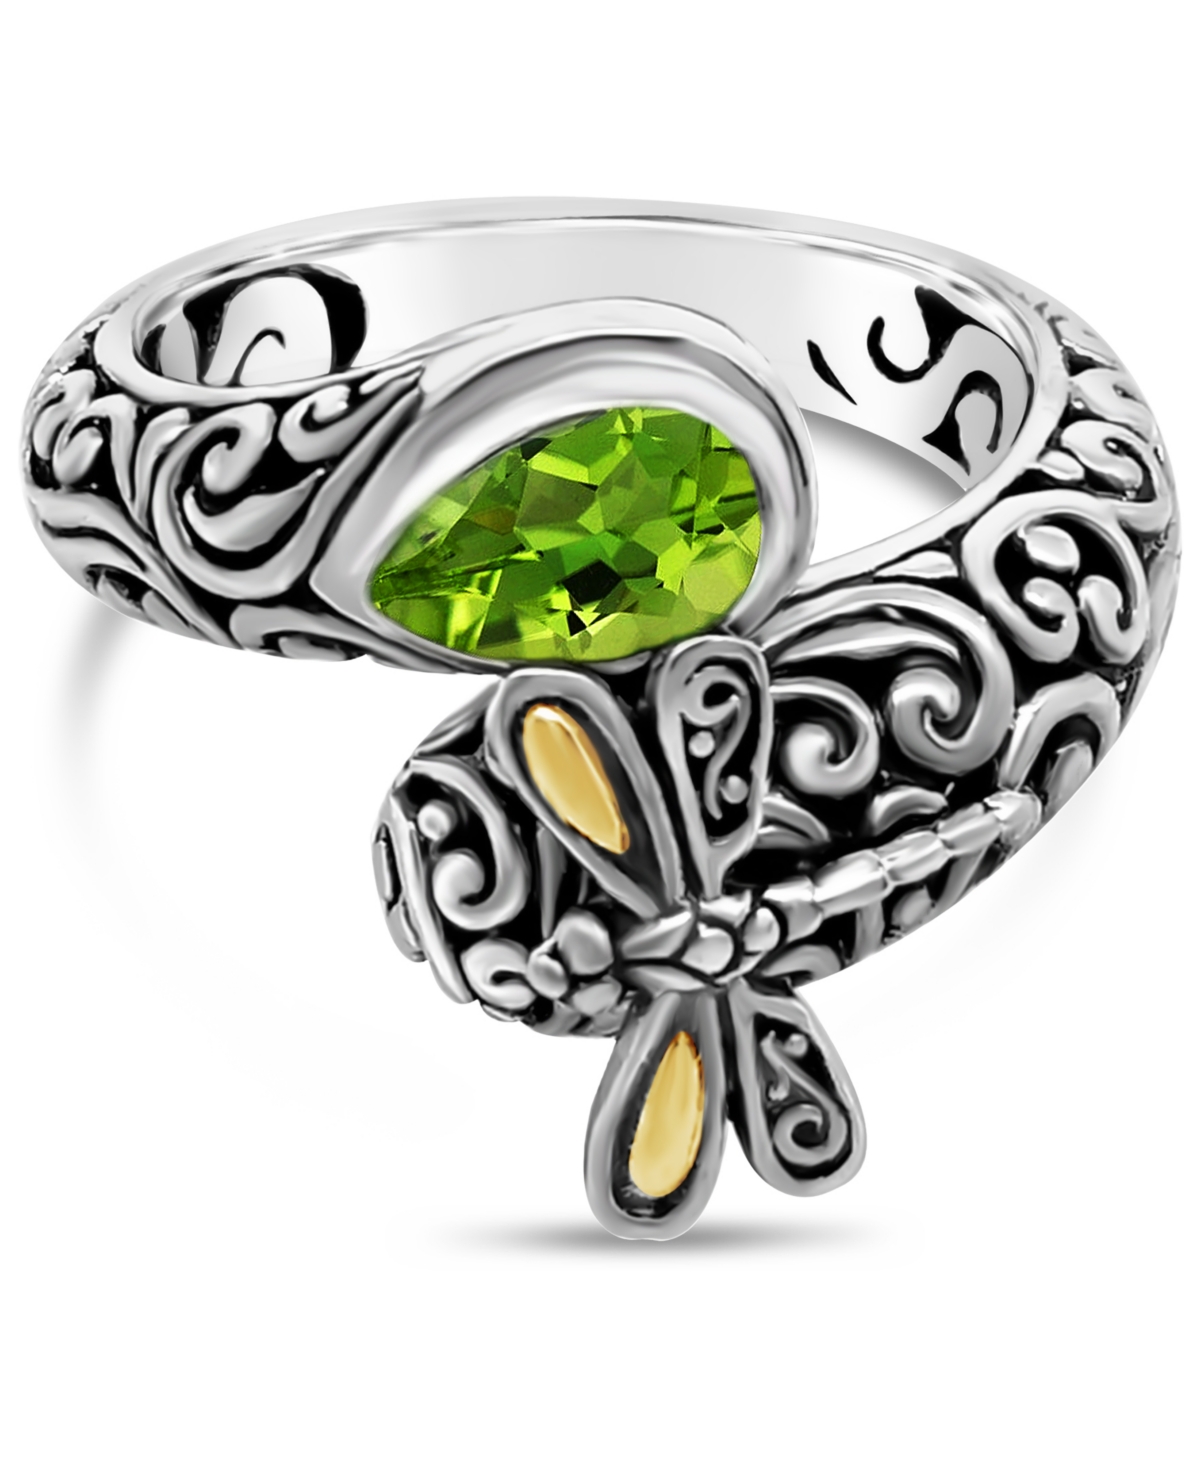 Gemstone Sweet Dragonfly Classic Ring in Sterling Silver and 18k Yellow Gold Accents (Available in Citrine and Peridot) - Peridot